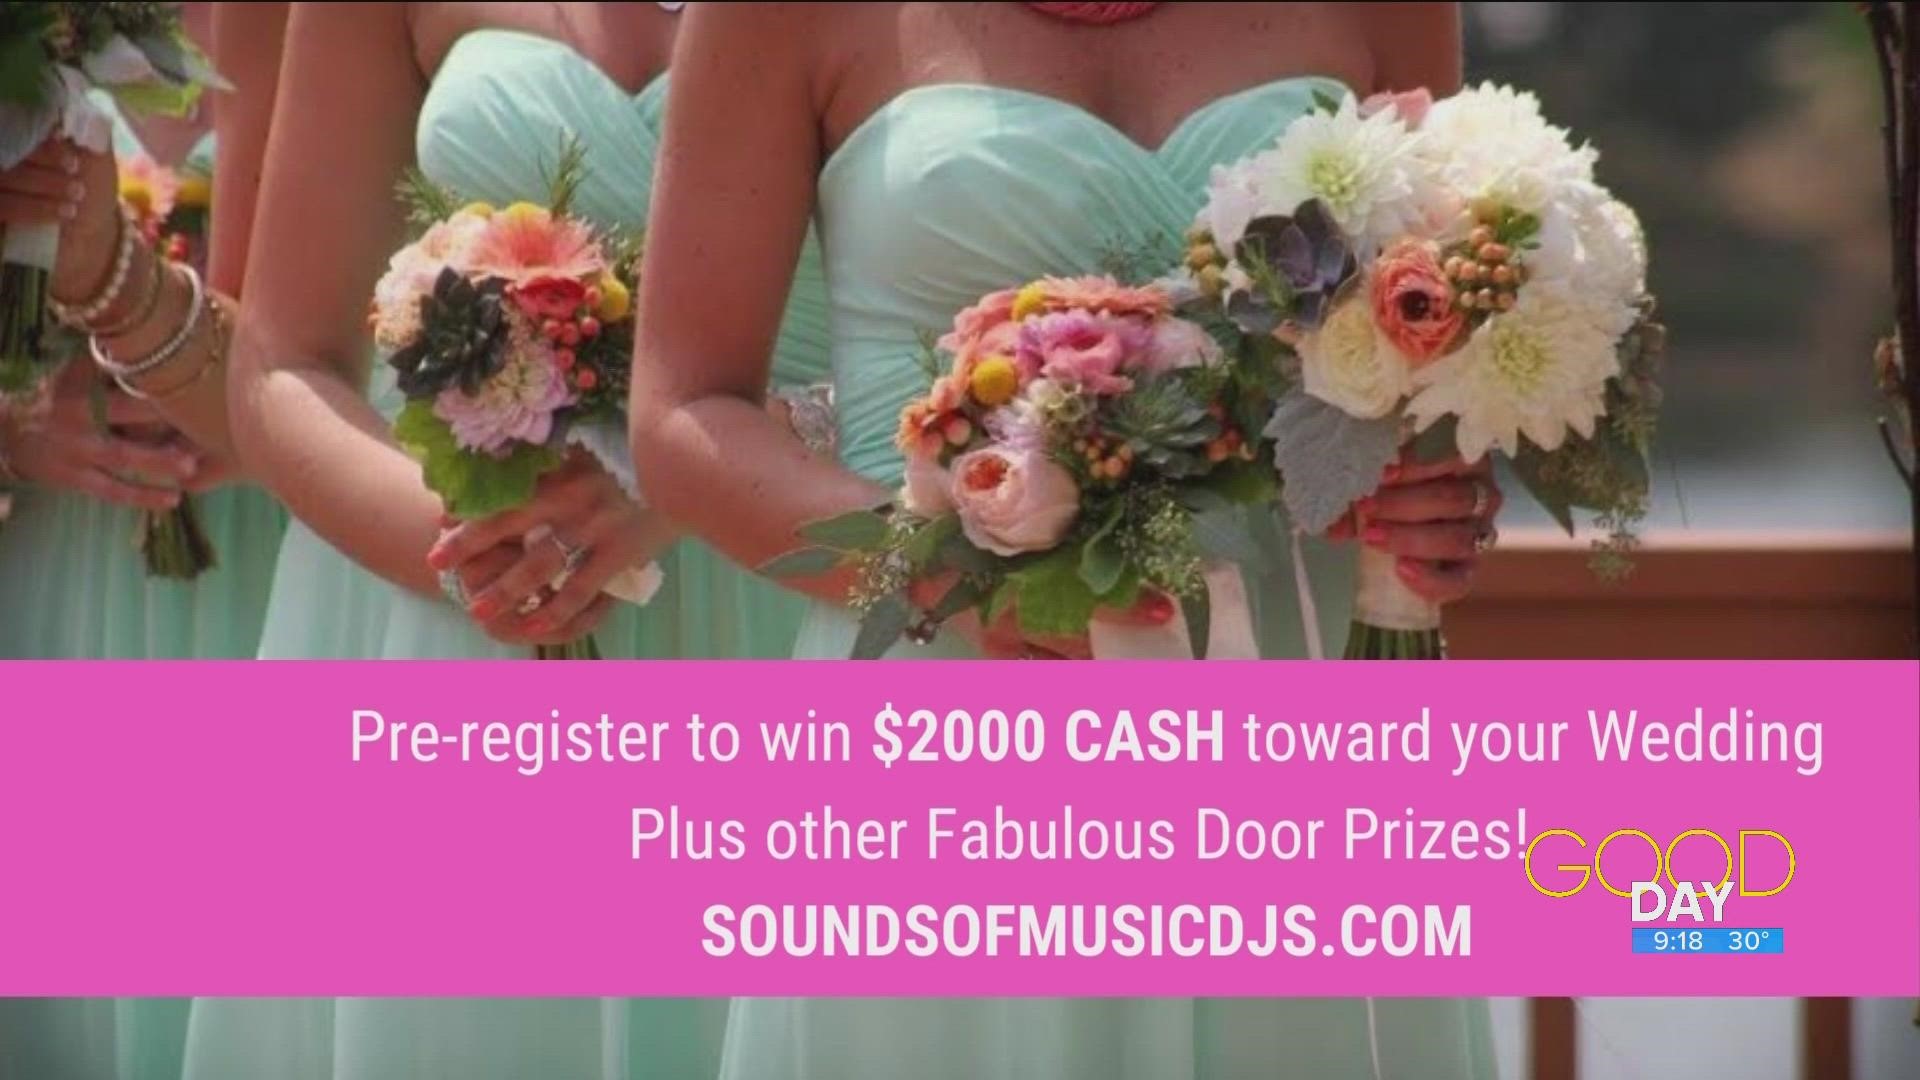 Sounds of Music DJs is hosting a 'Super Bridal Show' Saturday and Sunday in northwest Ohio for all your wedding planning needs.